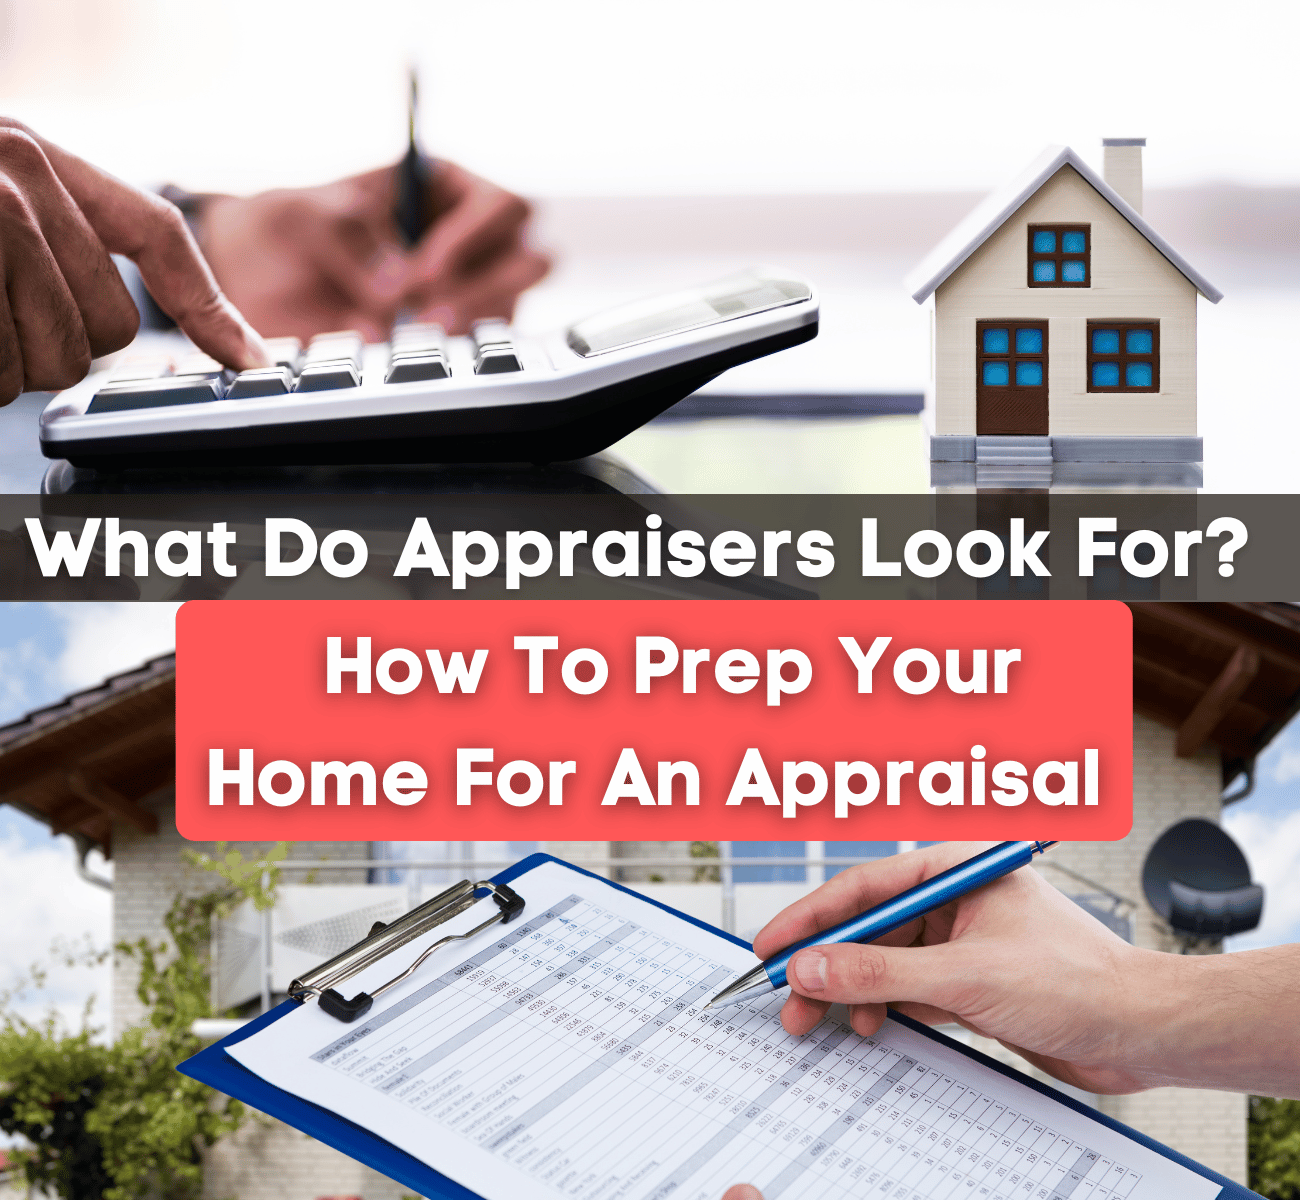 What Do Appraisers Look For? How to Prep Your Home For an Appraisal